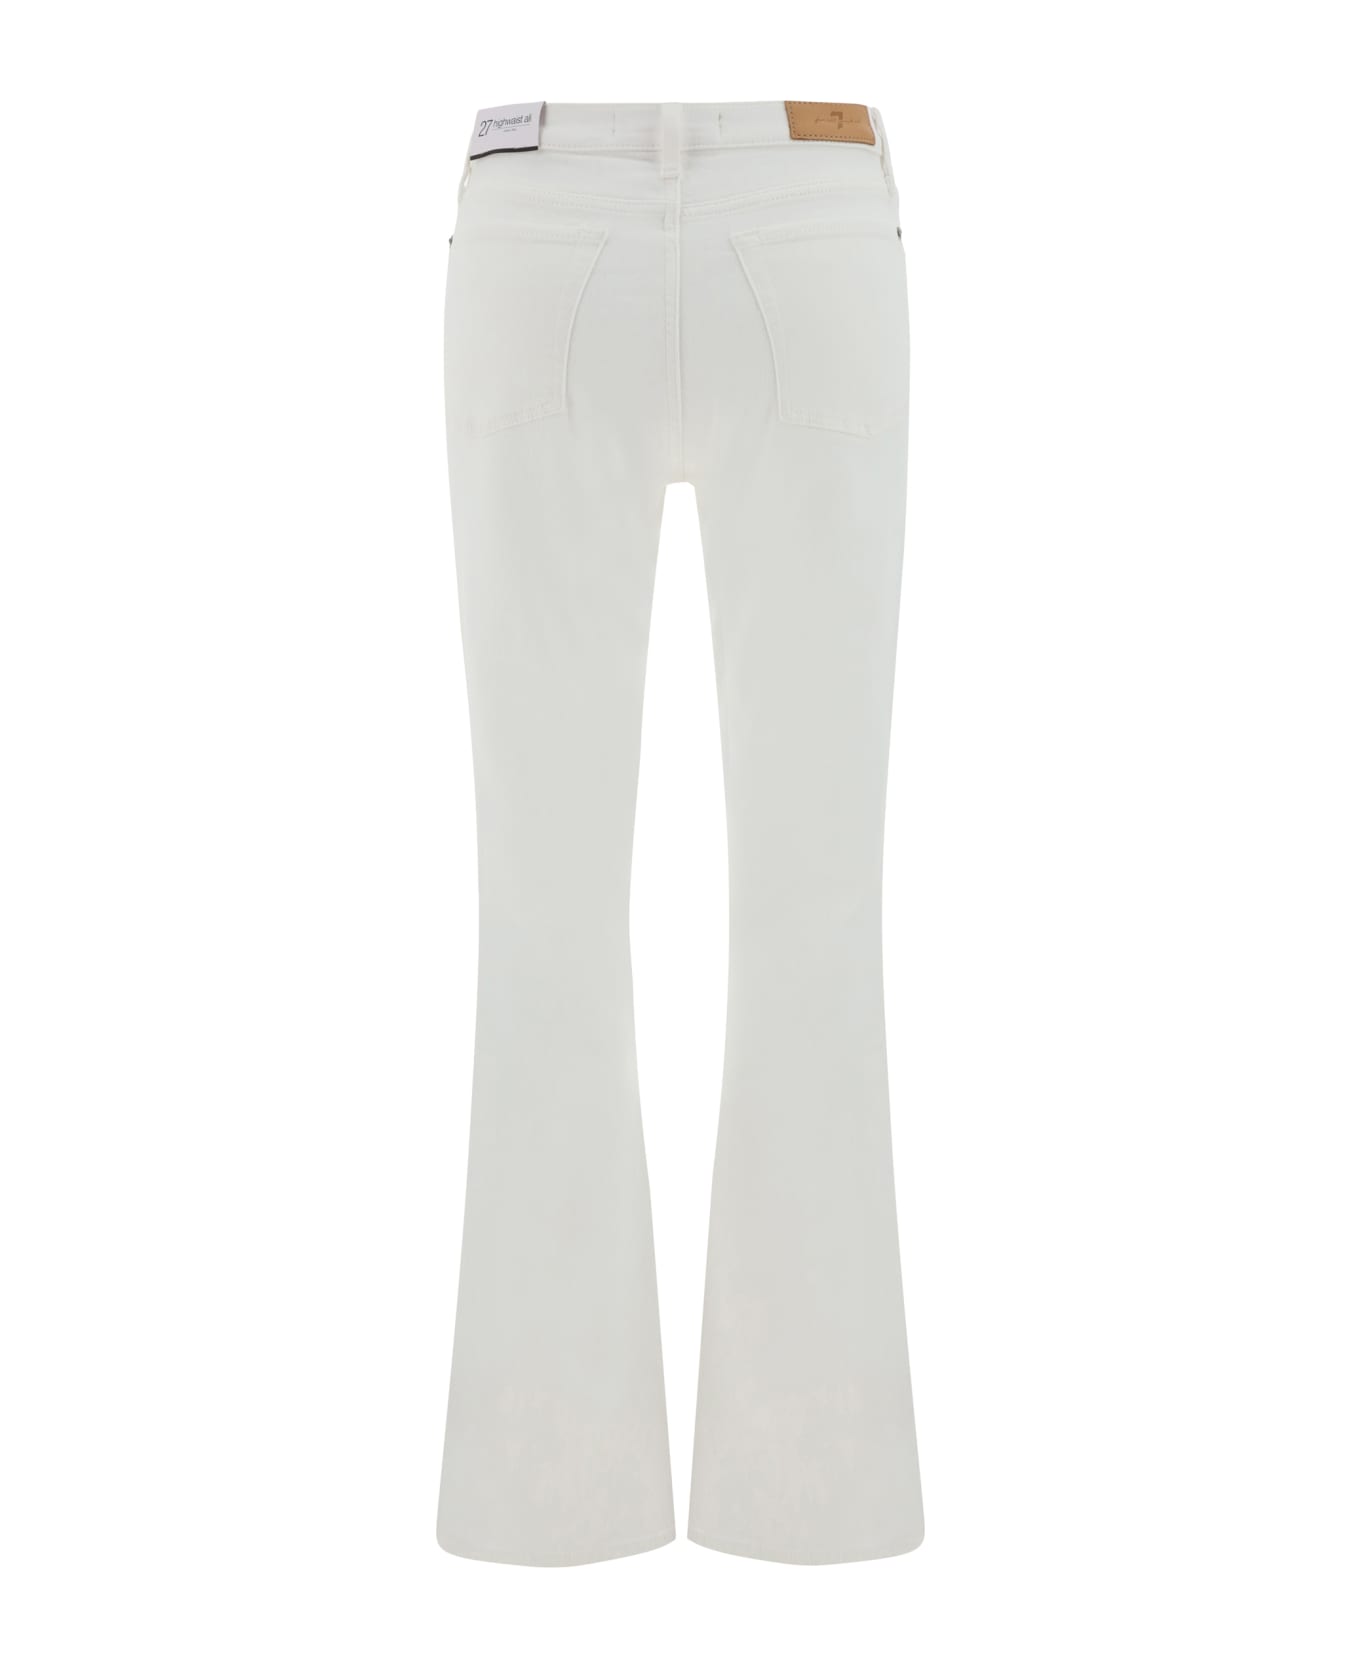 7 For All Mankind Soleil Pants - White ボトムス